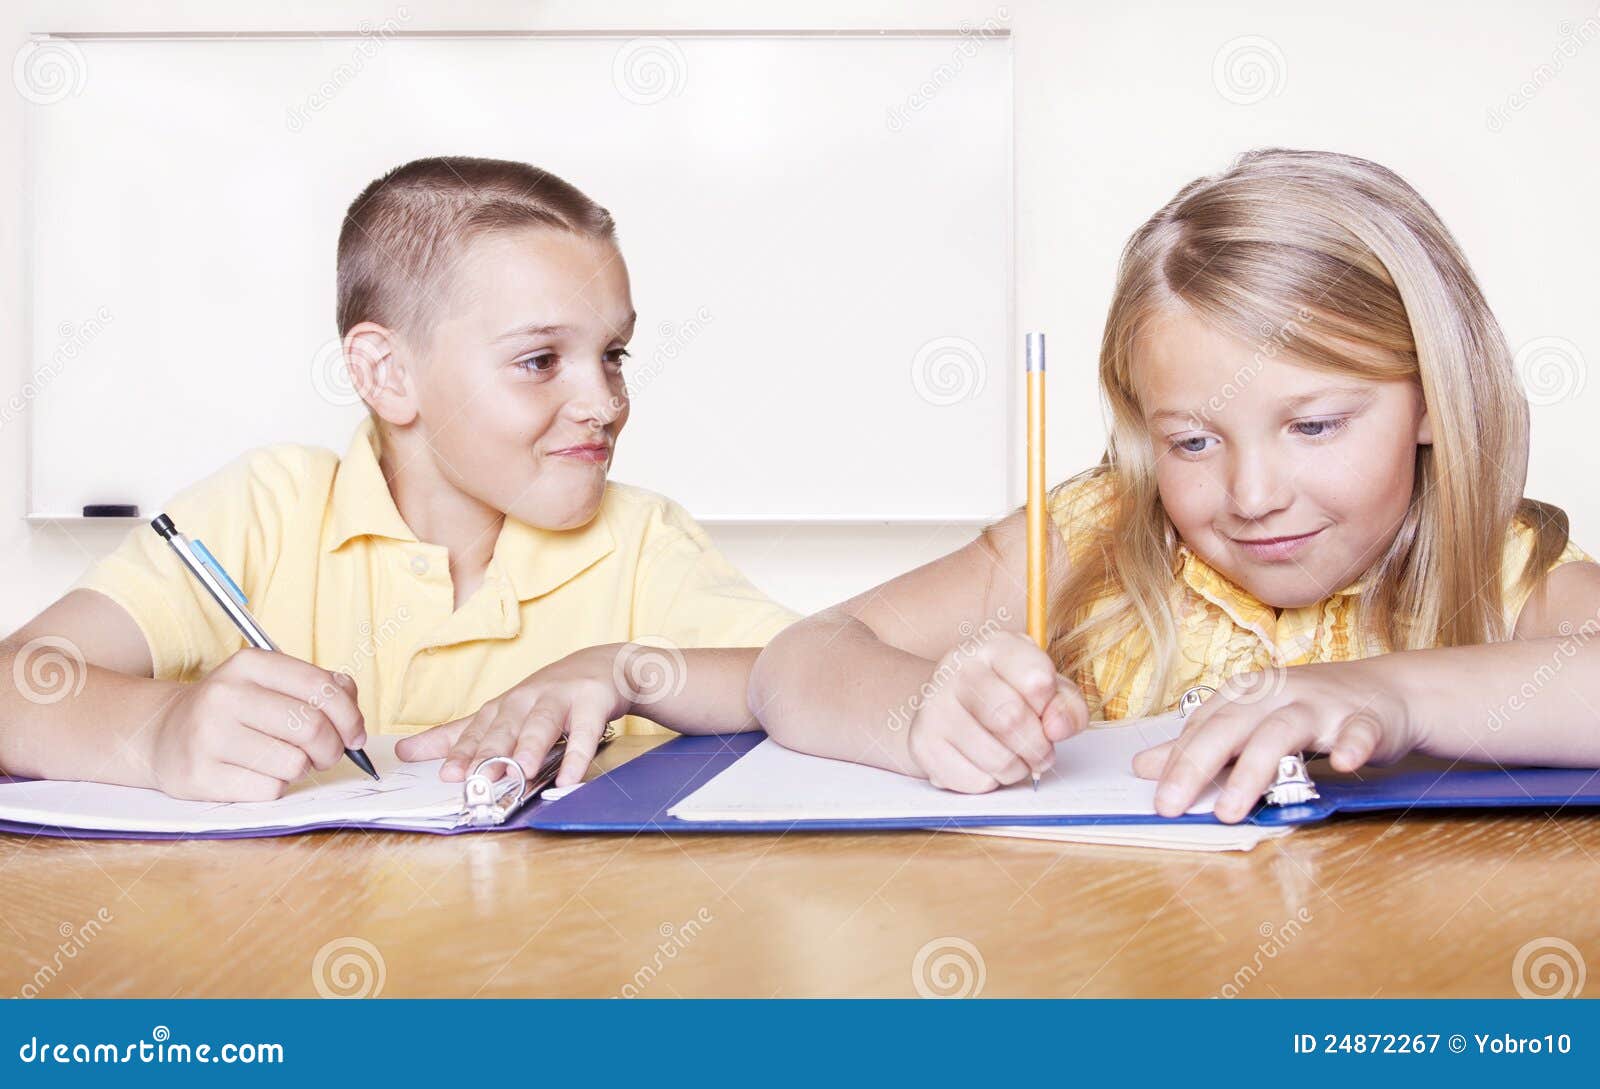 pictures of students doing homework